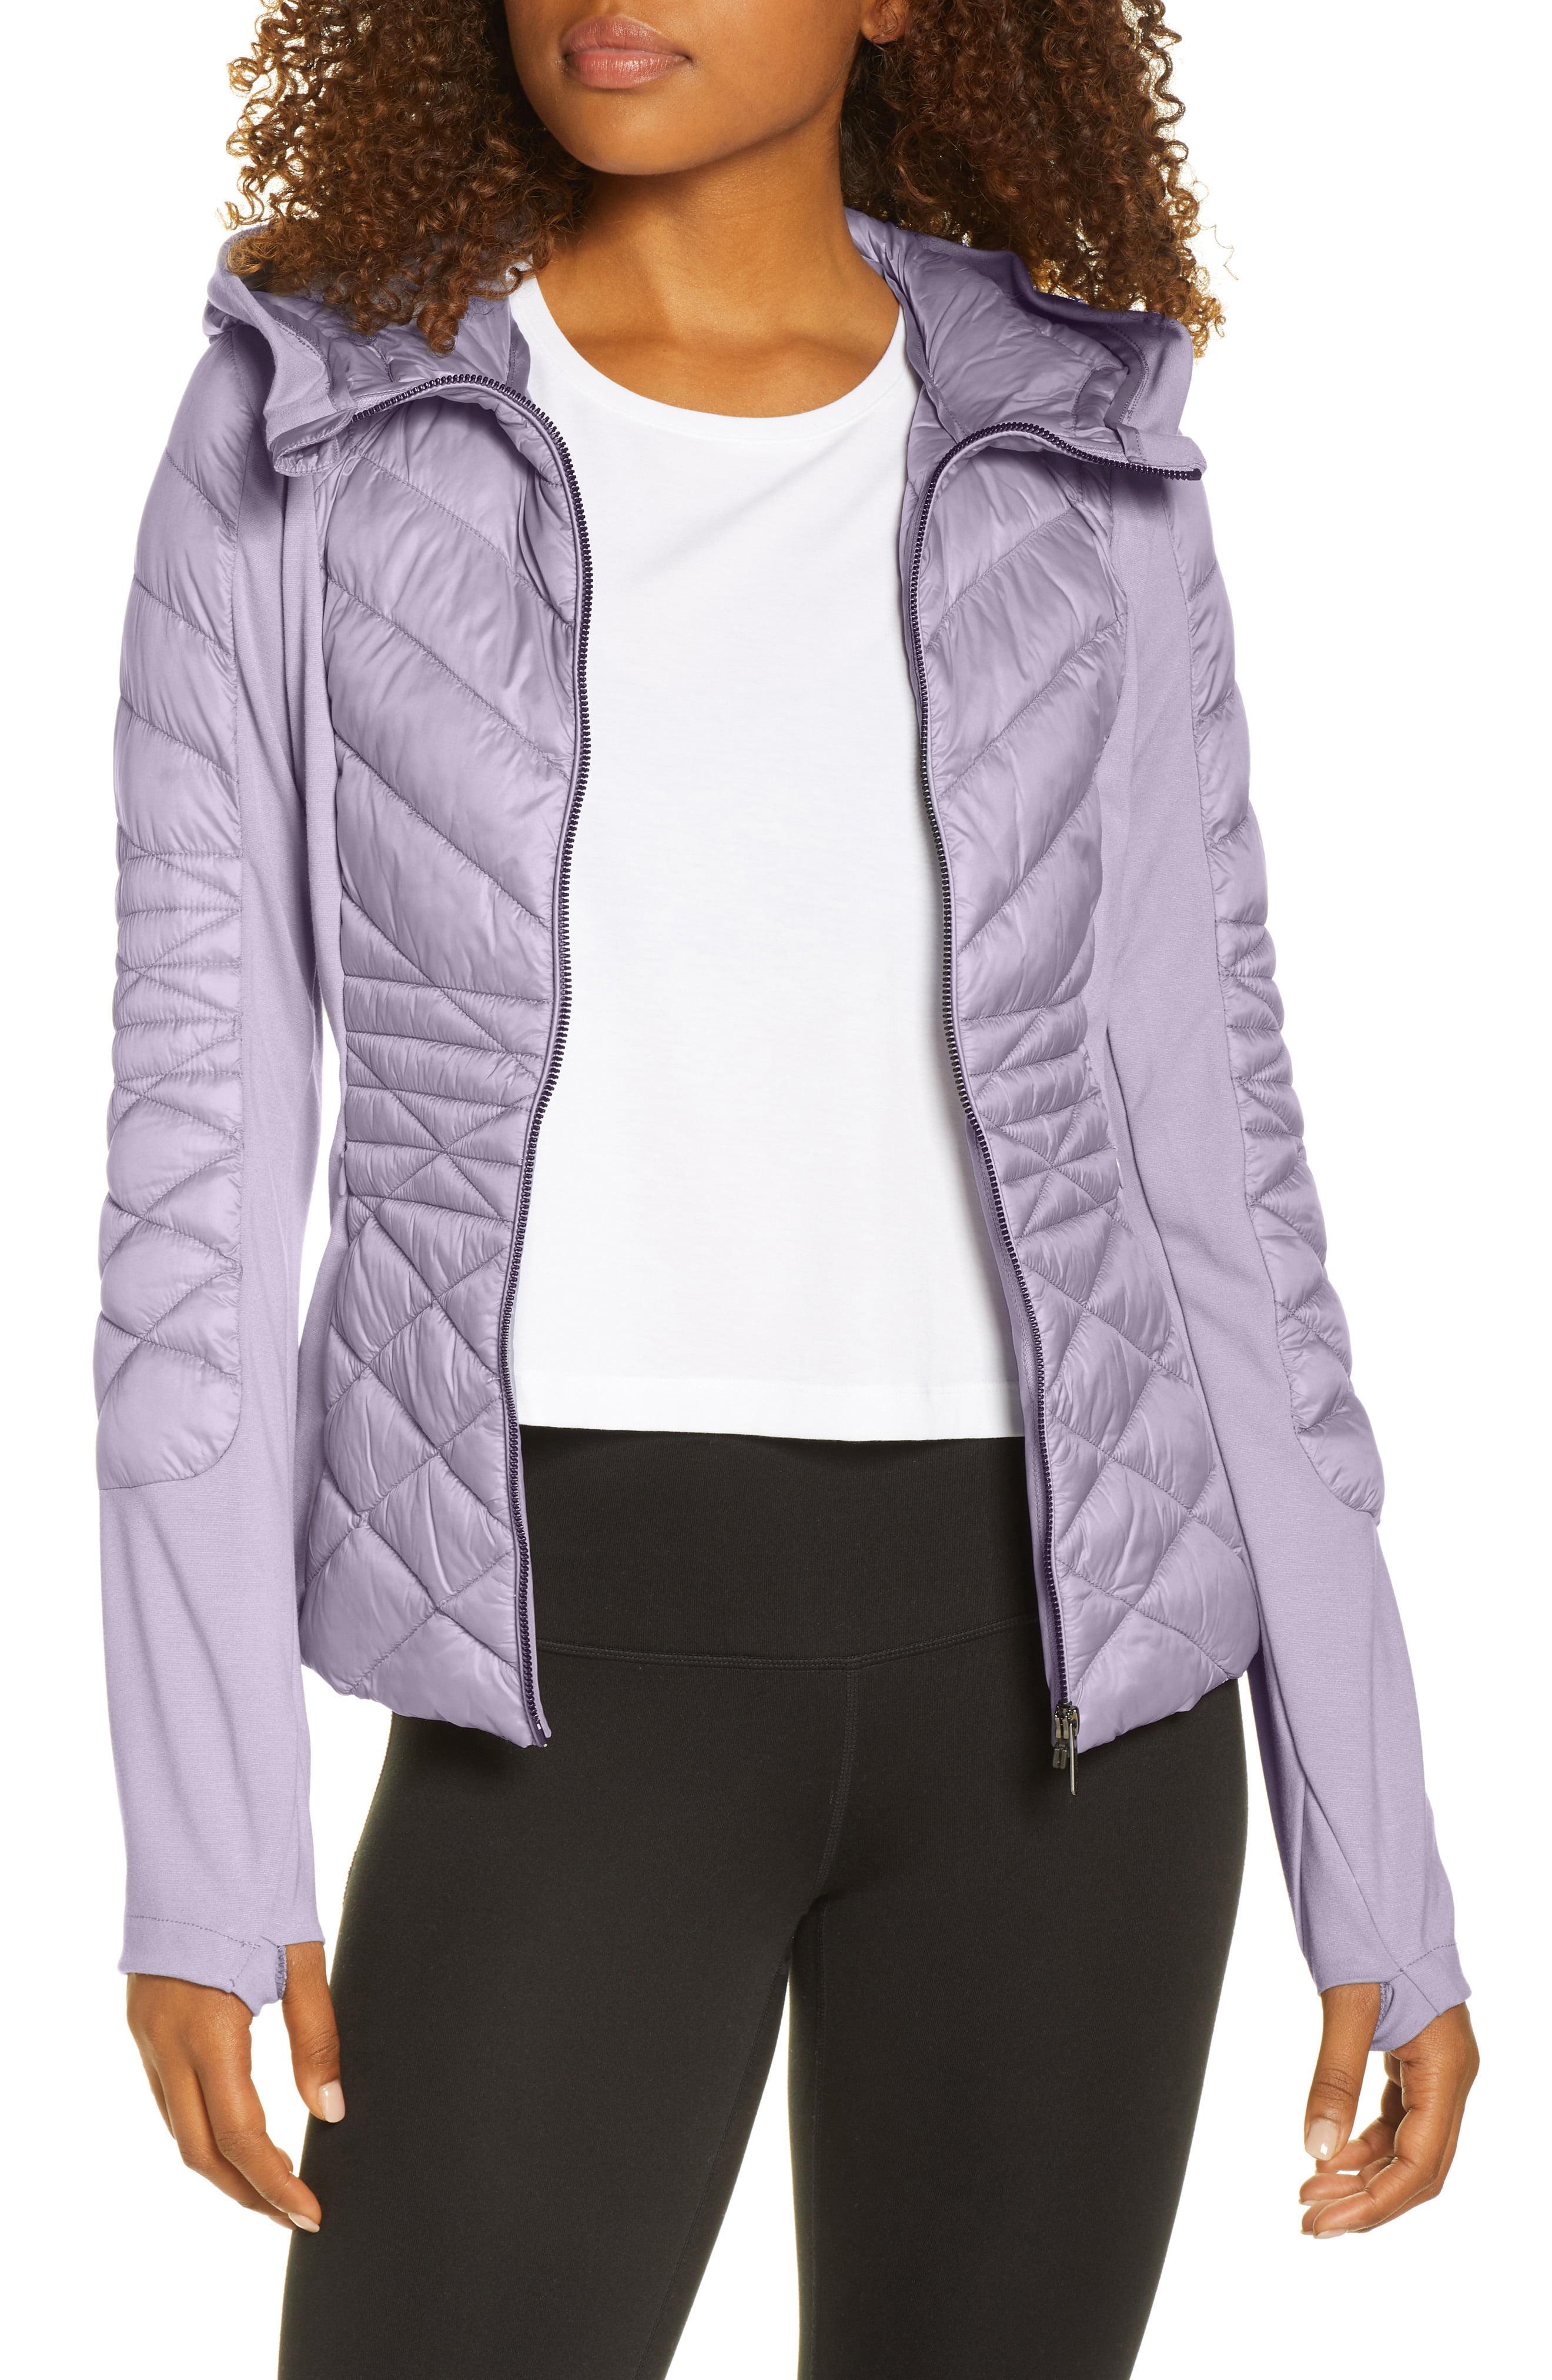 Zella Quilted Performance Jacket in Gray - Lyst